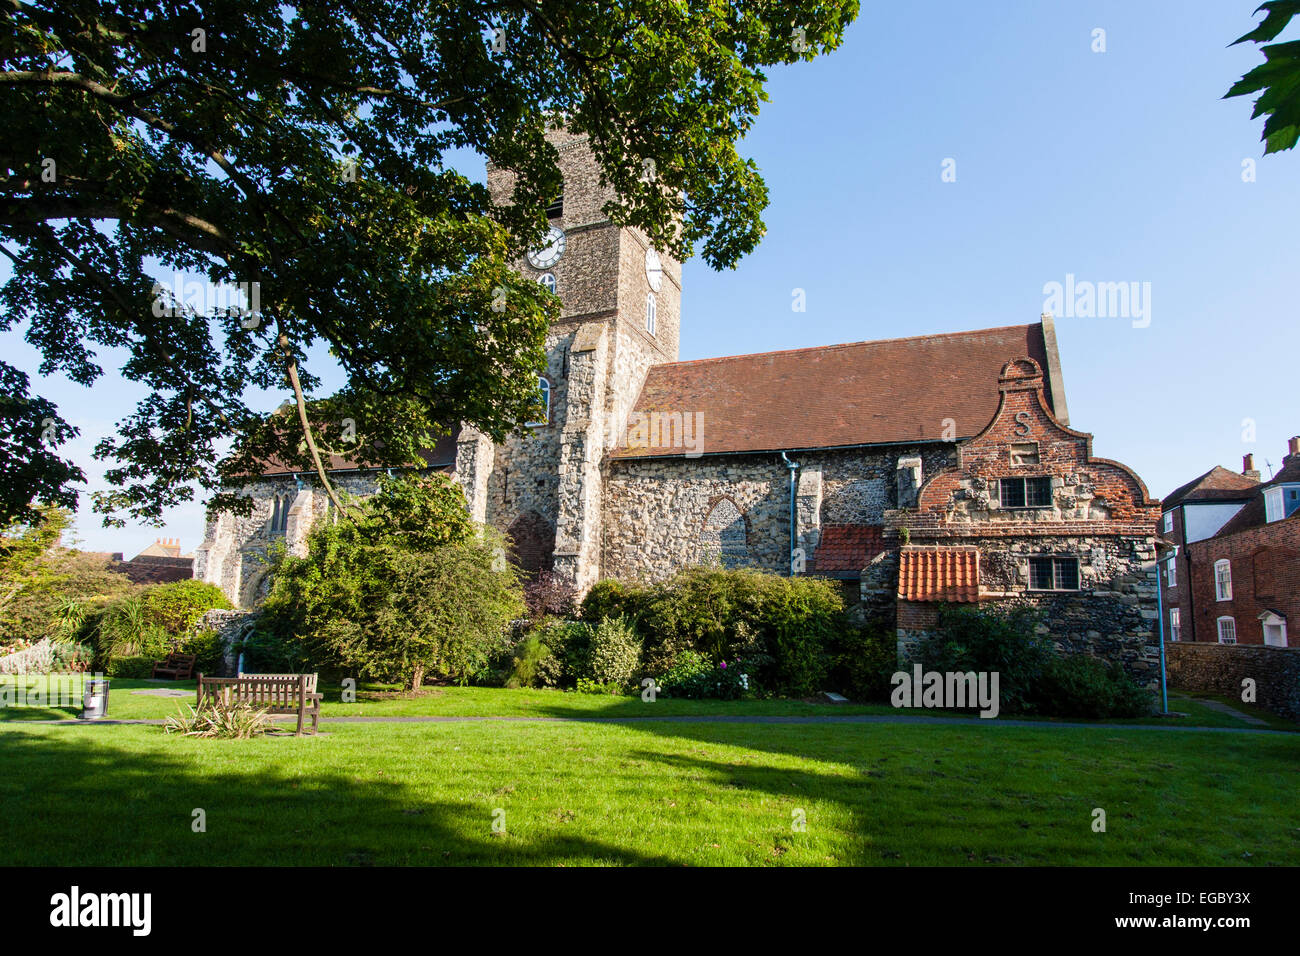 St Peters Norman church, 11th century stone building with middle clock tower against clear blue sky at the historical market town of Sandwich, Kent. Stock Photo